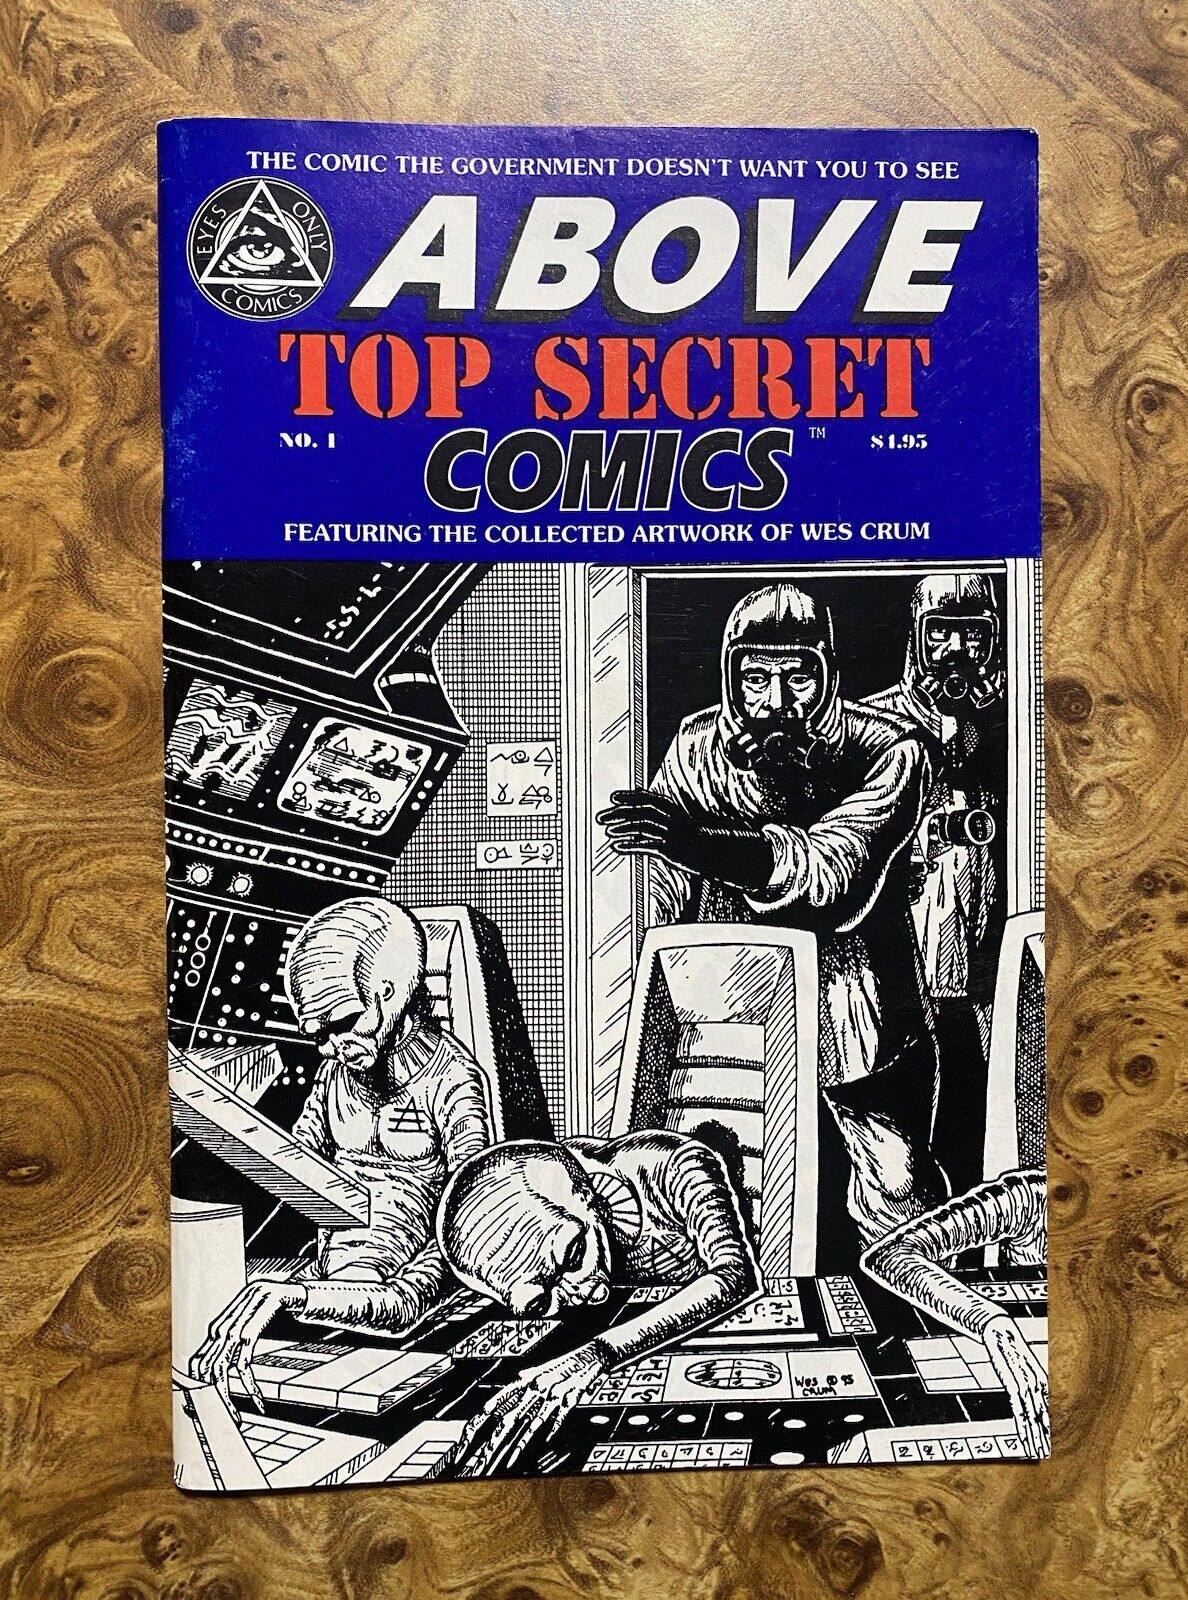 Above Top Secret Comics #1 Collected work of Wes Crum 1995